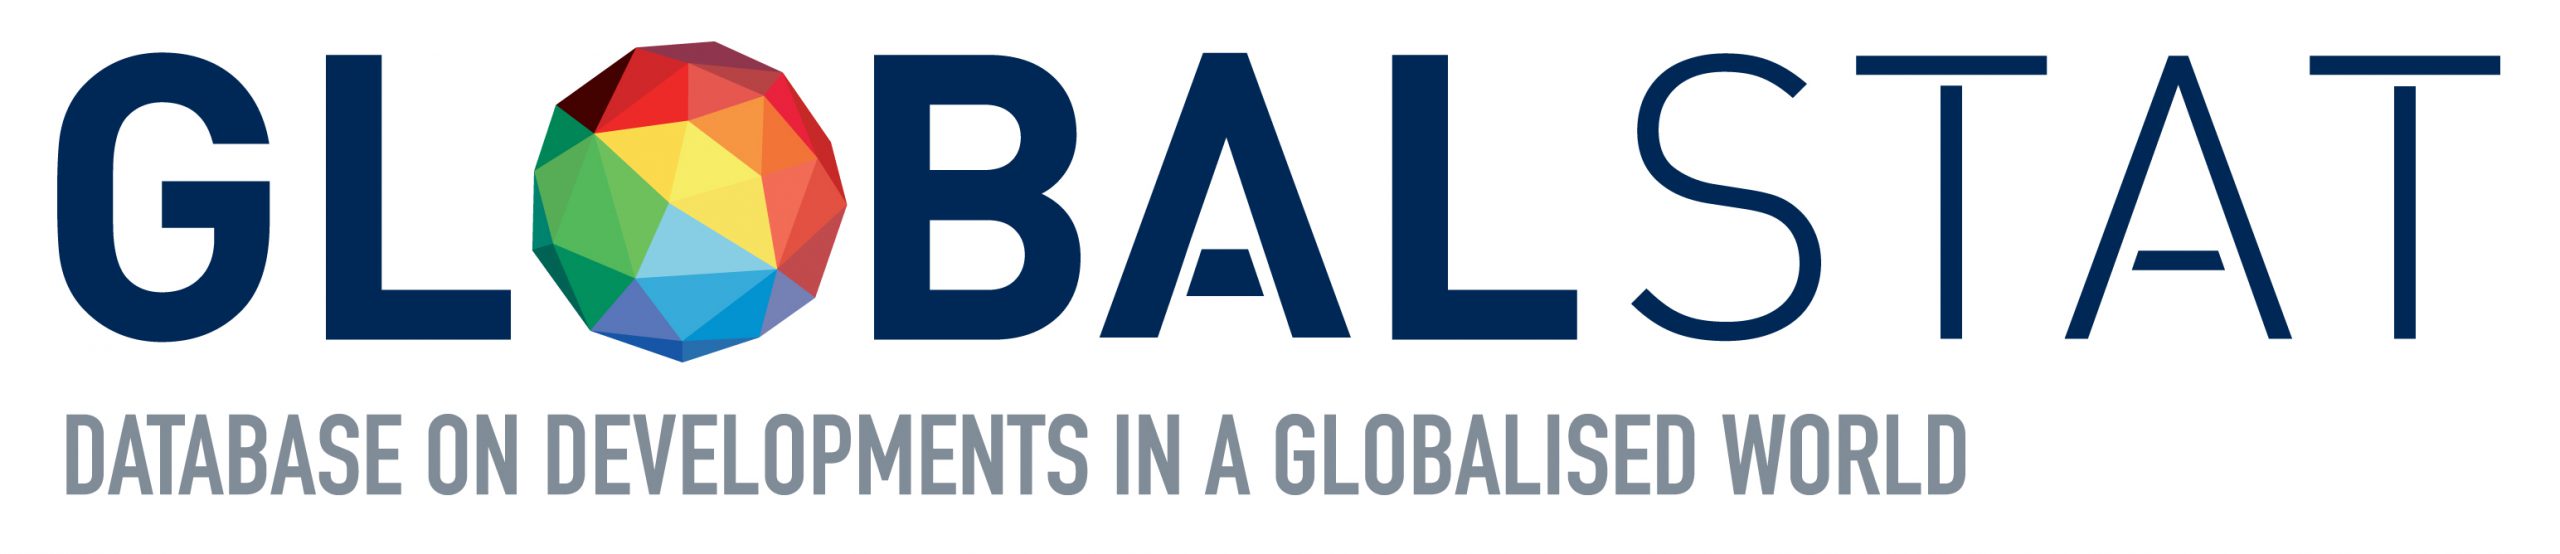 Empowerment Through Knowledge: GlobalStat database available soon on the EPRS website